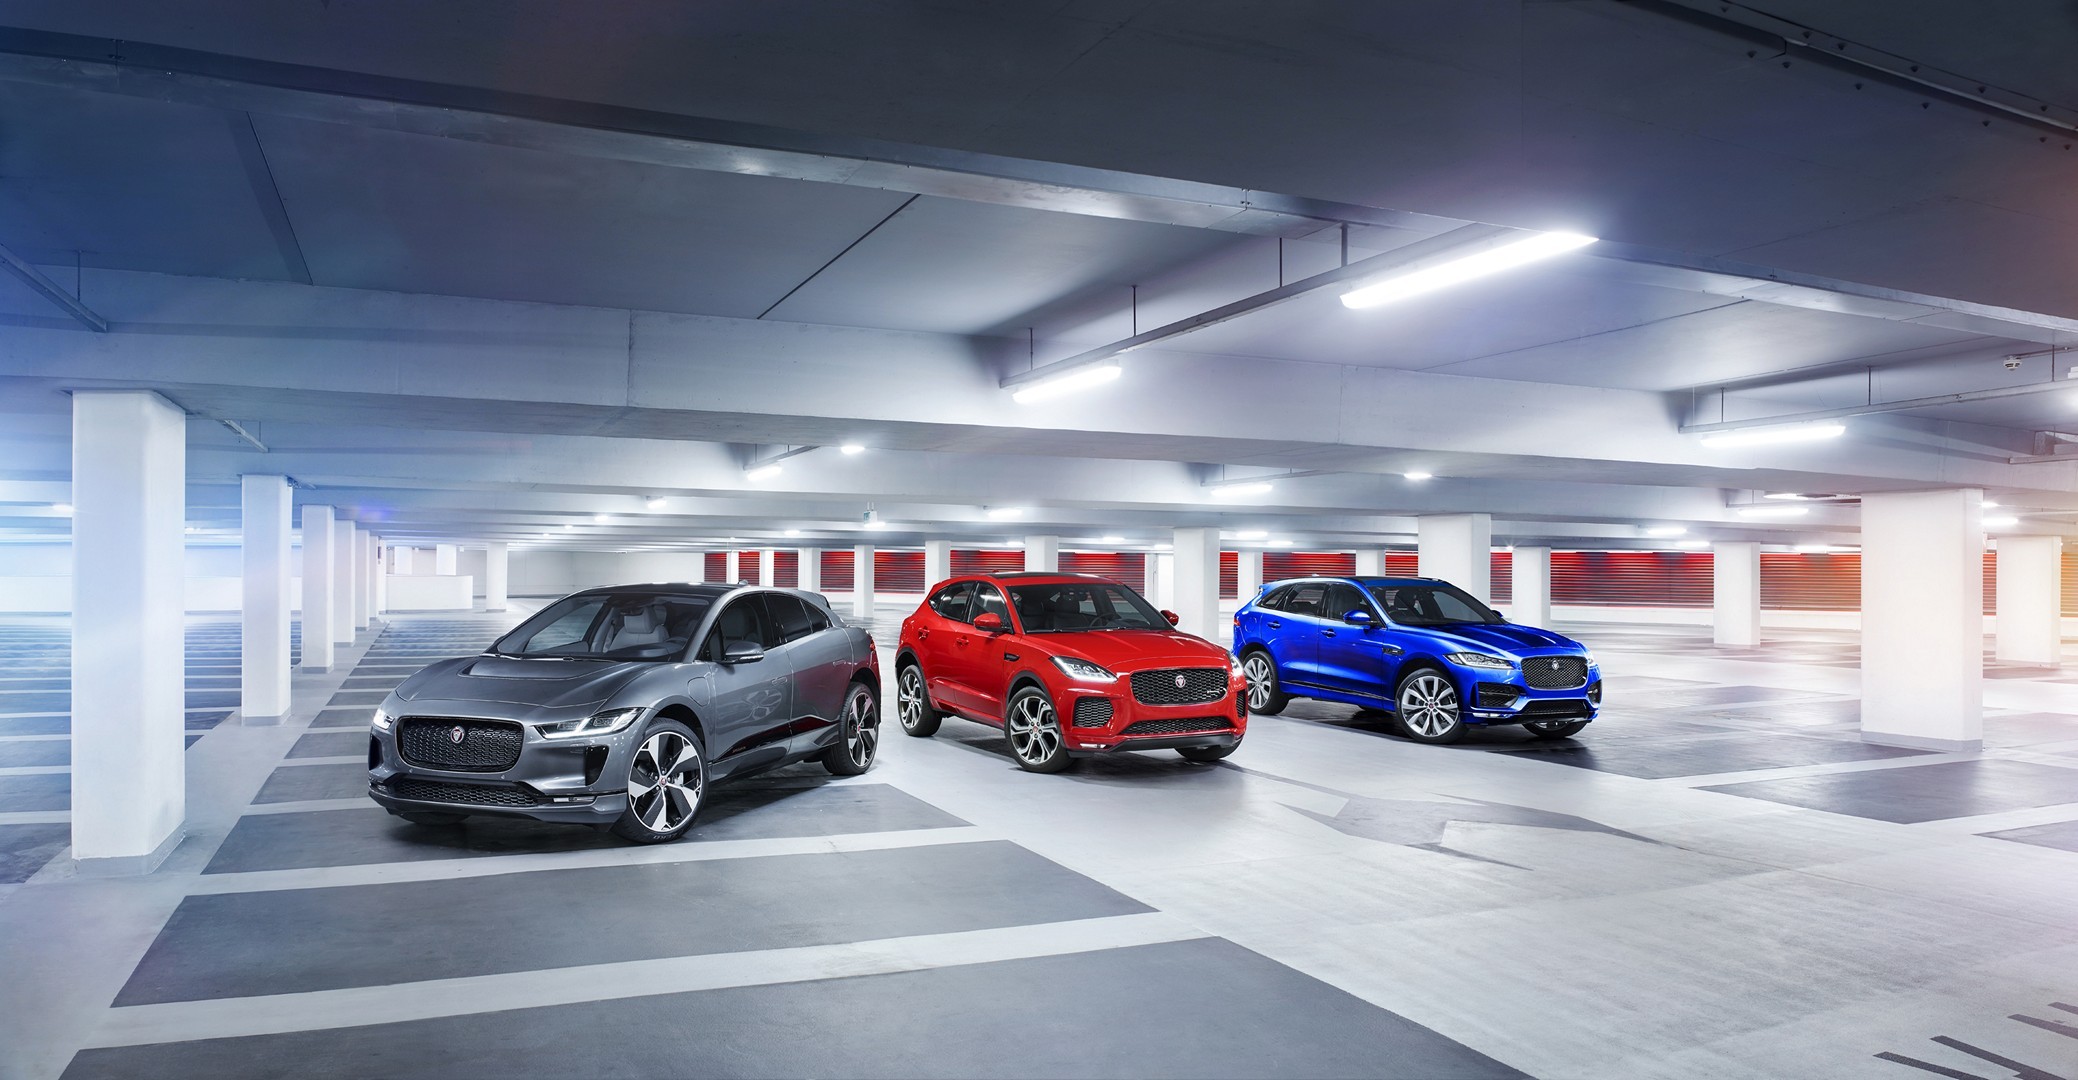 https://s1.cdn.autoevolution.com/images/news/gallery/2020-jaguar-i-pace-update-offers-234-miles-of-range-thanks-to-etrophy-know-how_29.jpg